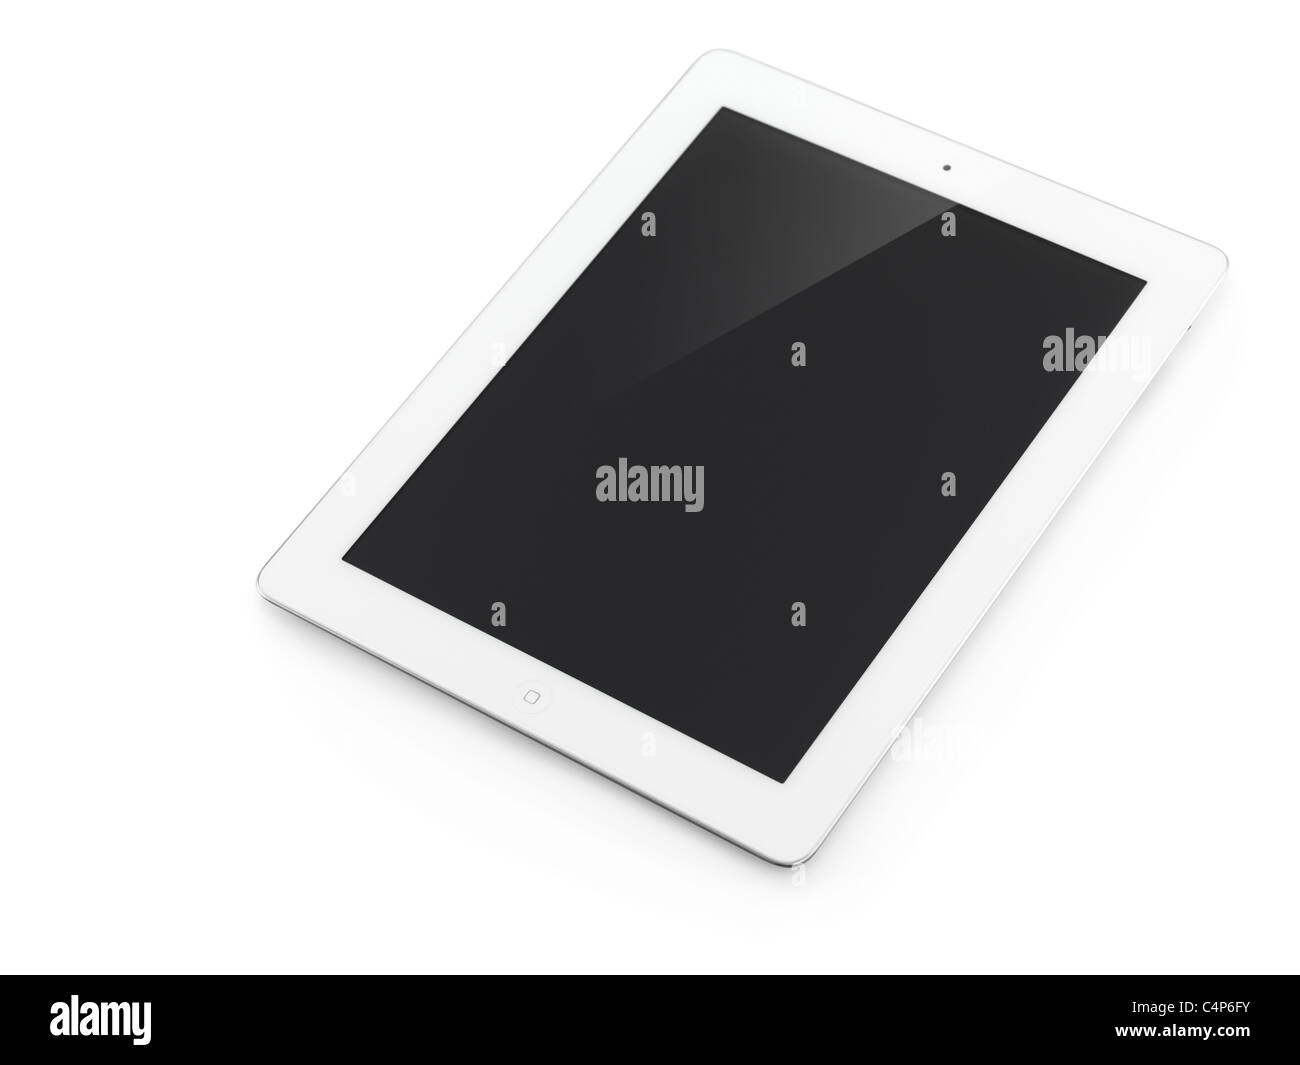 White Apple iPad 2 tablet computer with blacnk screen. Isolated with clipping path on white background. Stock Photo